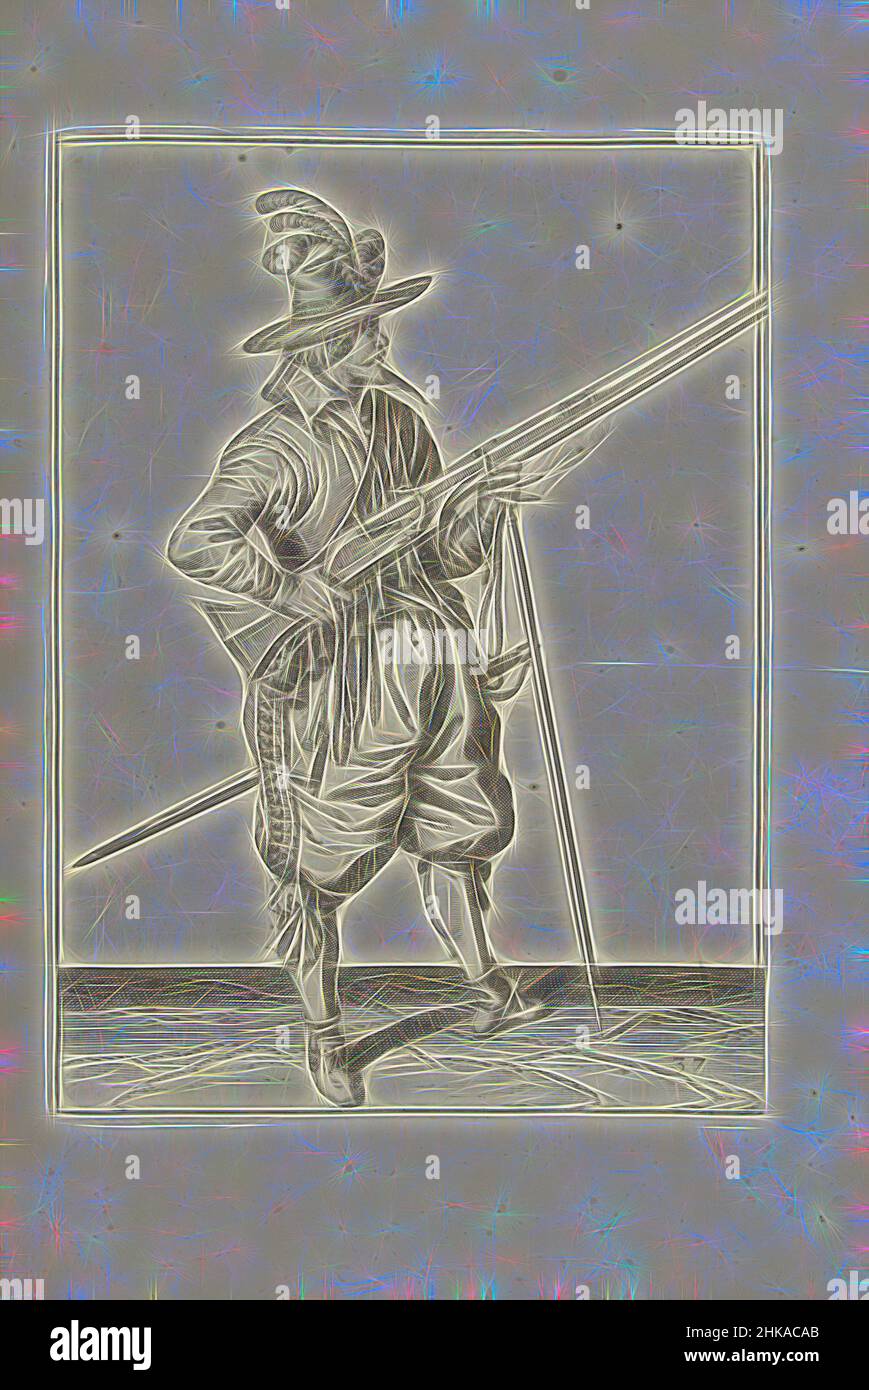 Inspired by Soldier on guard holding his musket by his right side angled upward, his finger on the trigger (no. 37), c. 1600, A soldier on guard, full-length, to the right, holding a musket (a certain type of firearm) by his right side, his right index finger on the trigger, his left hand around the, Reimagined by Artotop. Classic art reinvented with a modern twist. Design of warm cheerful glowing of brightness and light ray radiance. Photography inspired by surrealism and futurism, embracing dynamic energy of modern technology, movement, speed and revolutionize culture Stock Photo